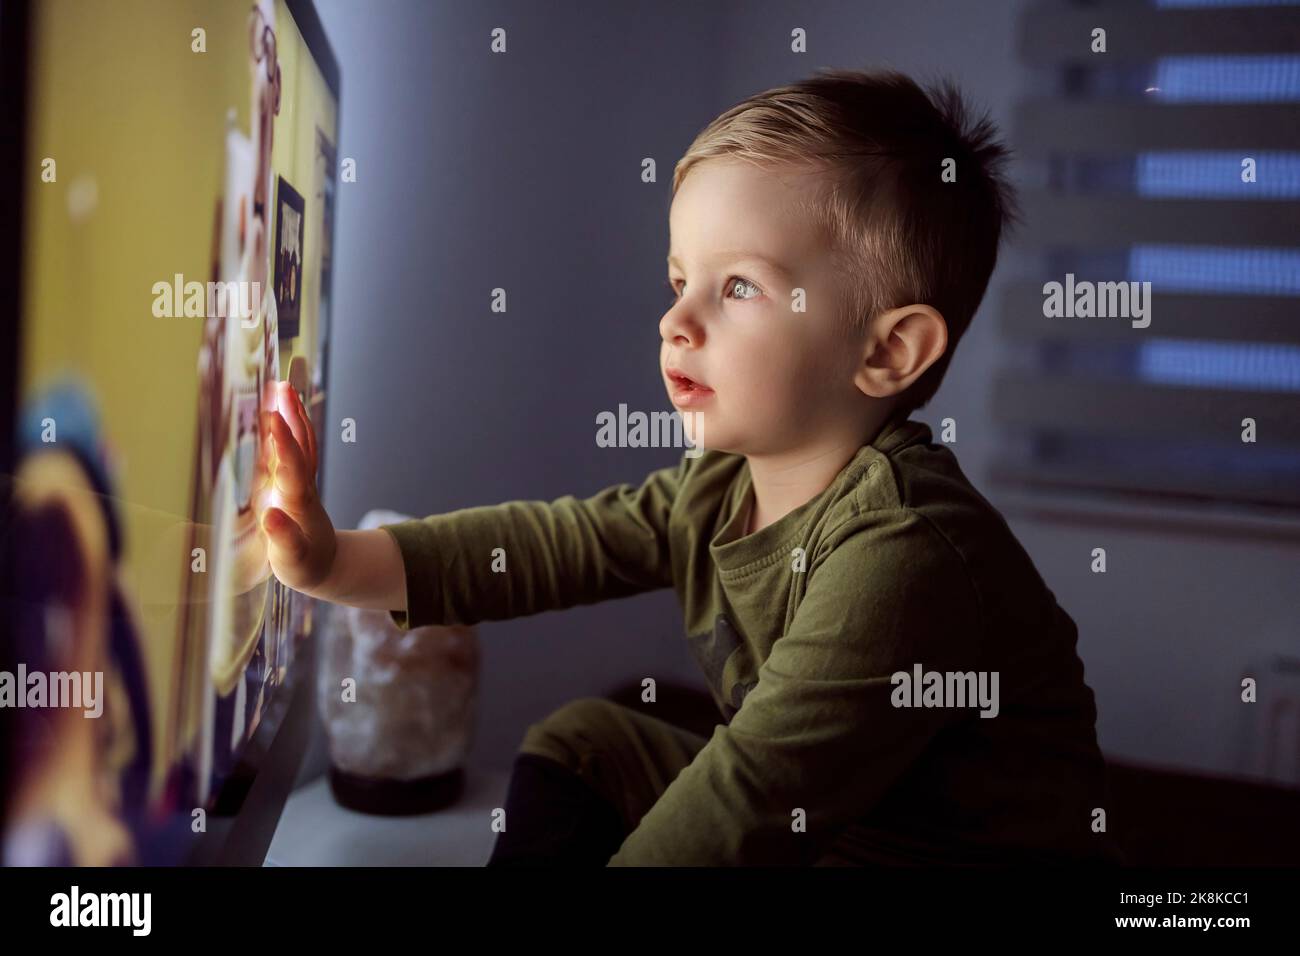 Children's addiction to television and cartoons. A boy touches the TV screen with one hand. Close up of a kid sitting right in front of the TV in his Stock Photo